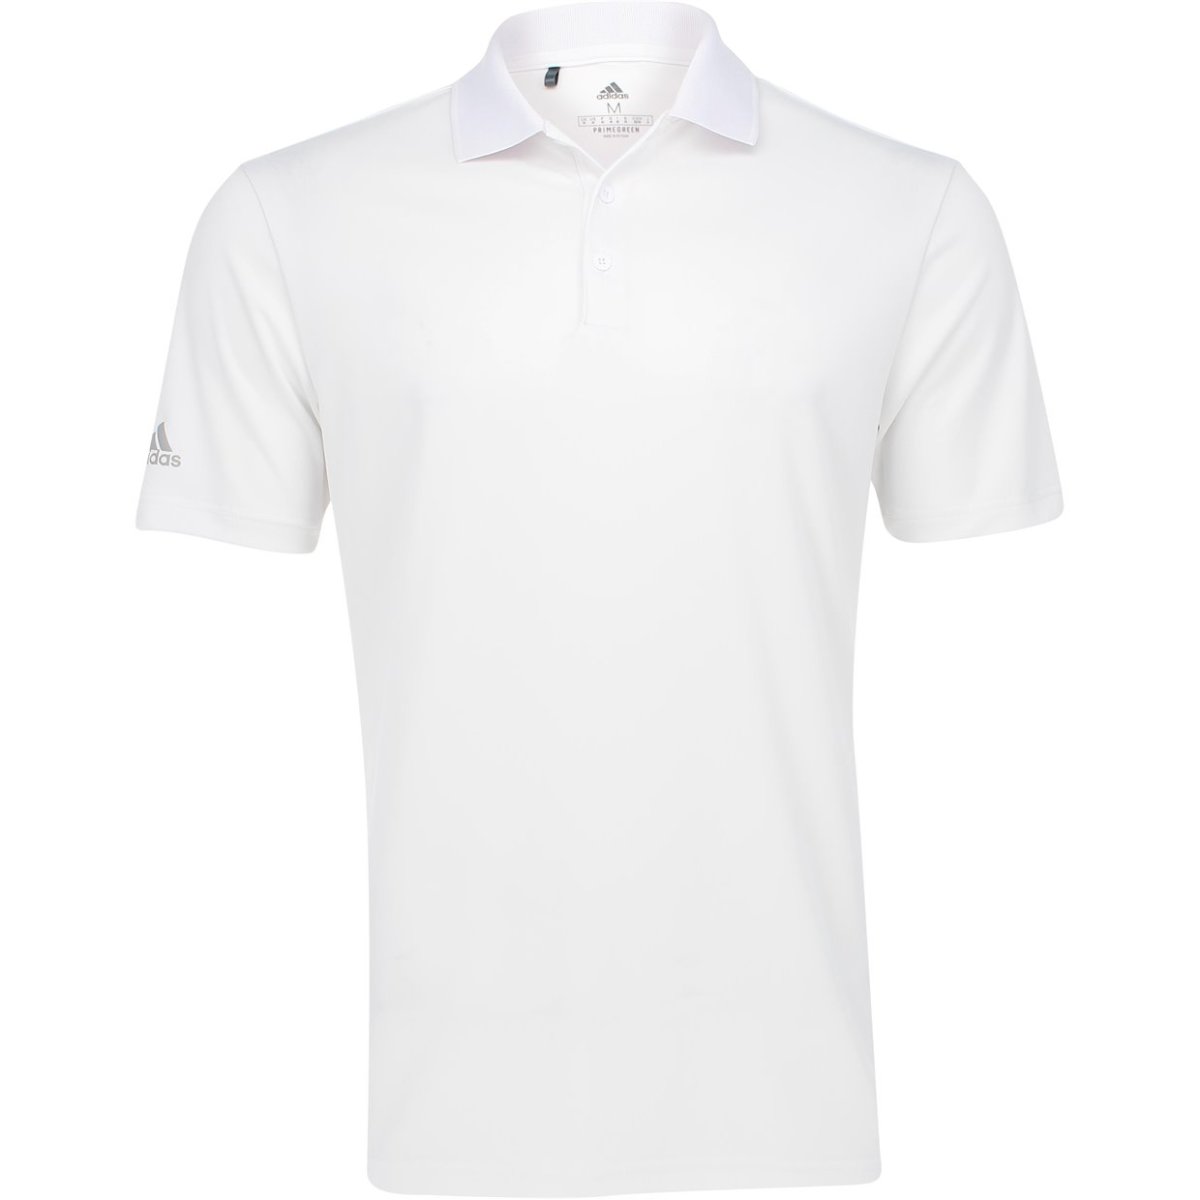 Shop the latest Adidas golf shirts for men, like the Performance Stretch polo, on Morning Read's online pro shop, powered by GlobalGolf.